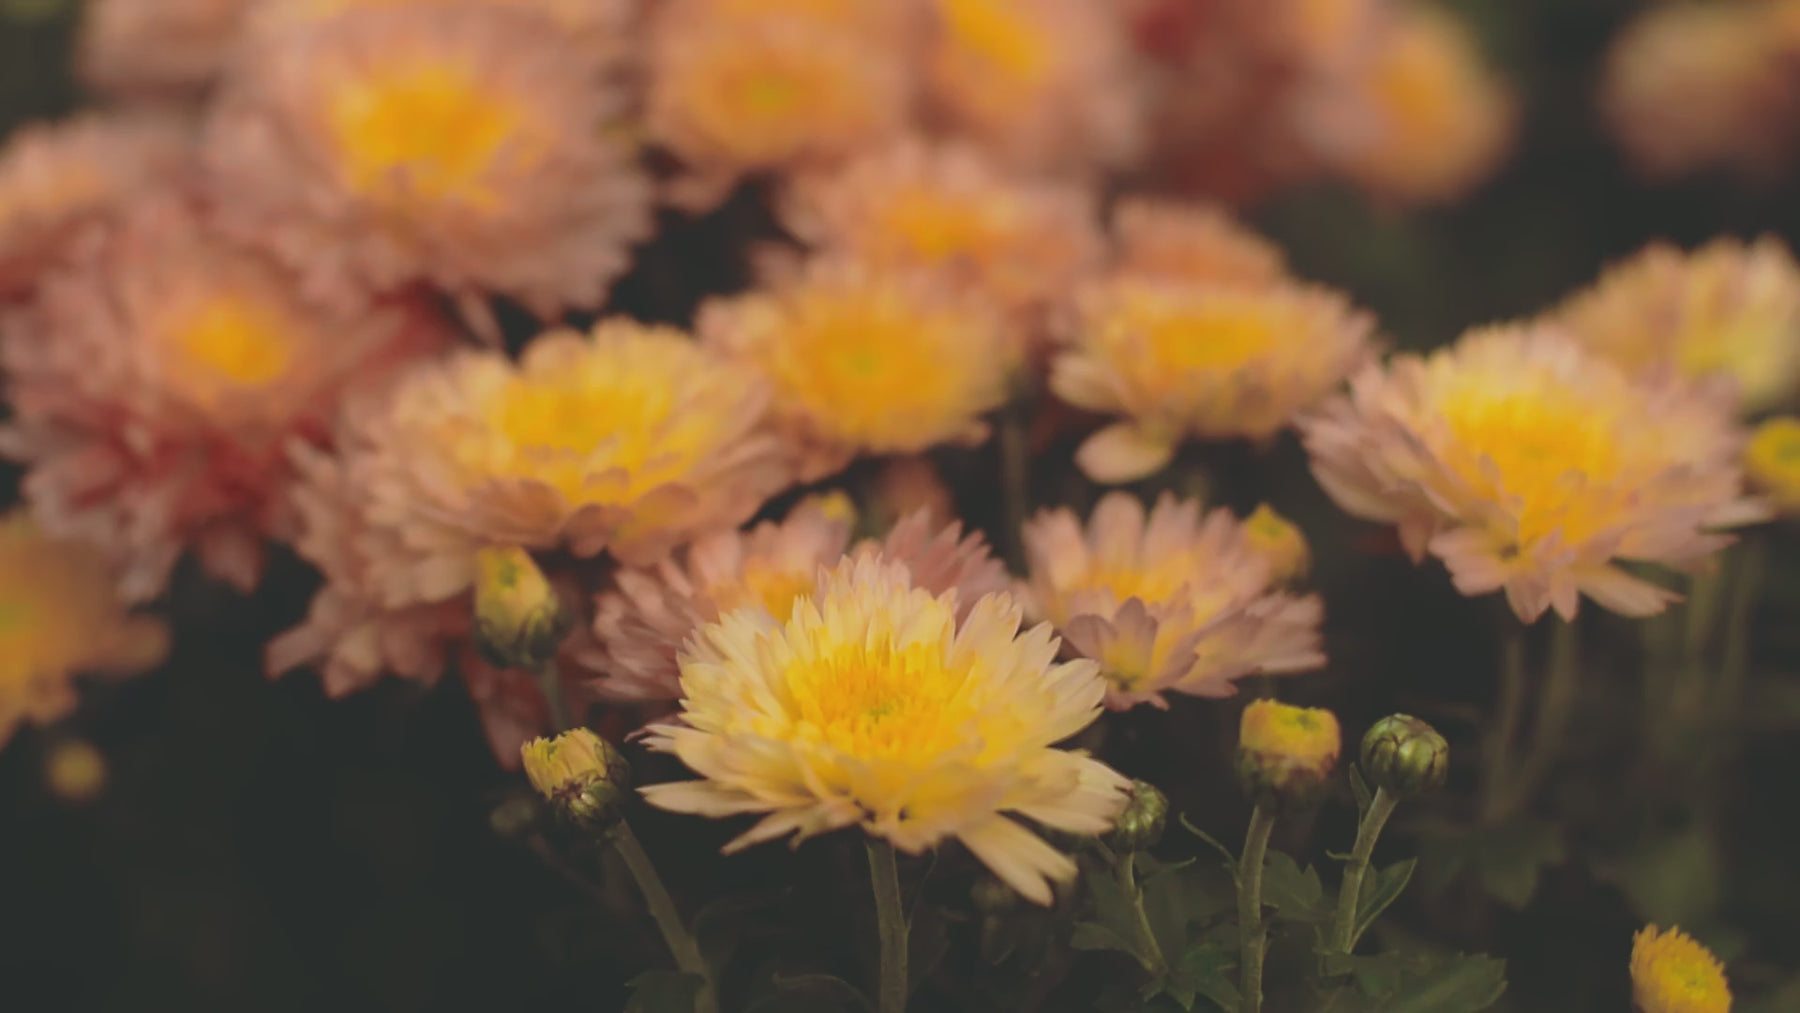 A close-up of blooming yellow and peach-colored chrysanthemums. The flowers have soft, delicate petals with vibrant centers, creating a warm and inviting display. The background is blurred, drawing focus to the intricate details and colors of the chrysanthemums in the foreground. The video player controls are visible at the bottom of the image.